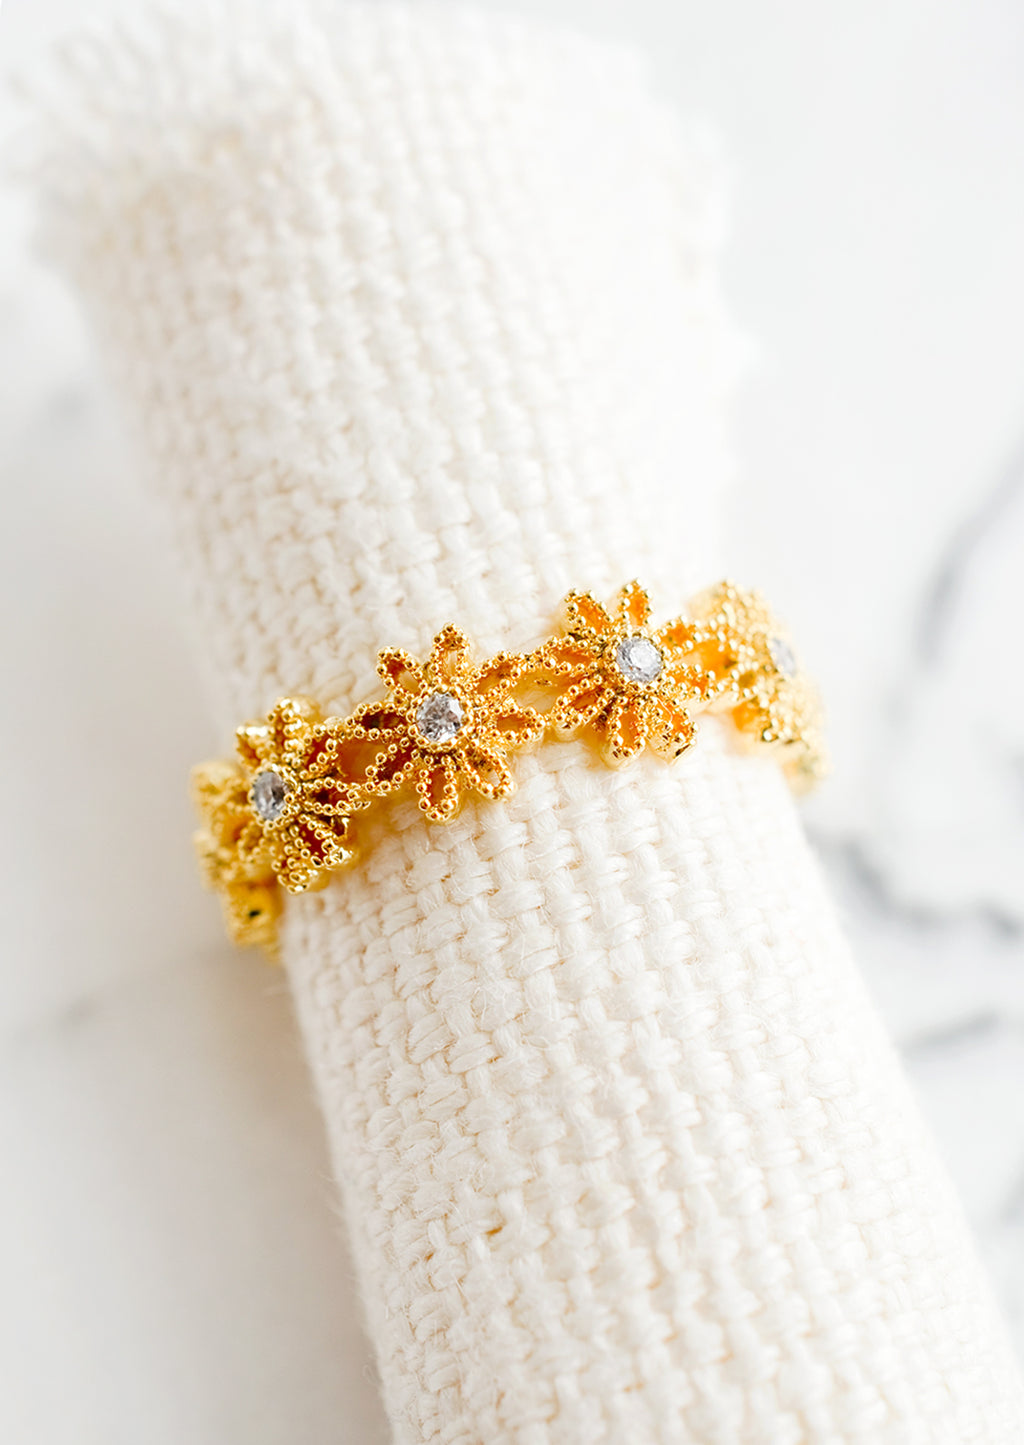 2: A gold ring made of flower shapes with crystal centers.